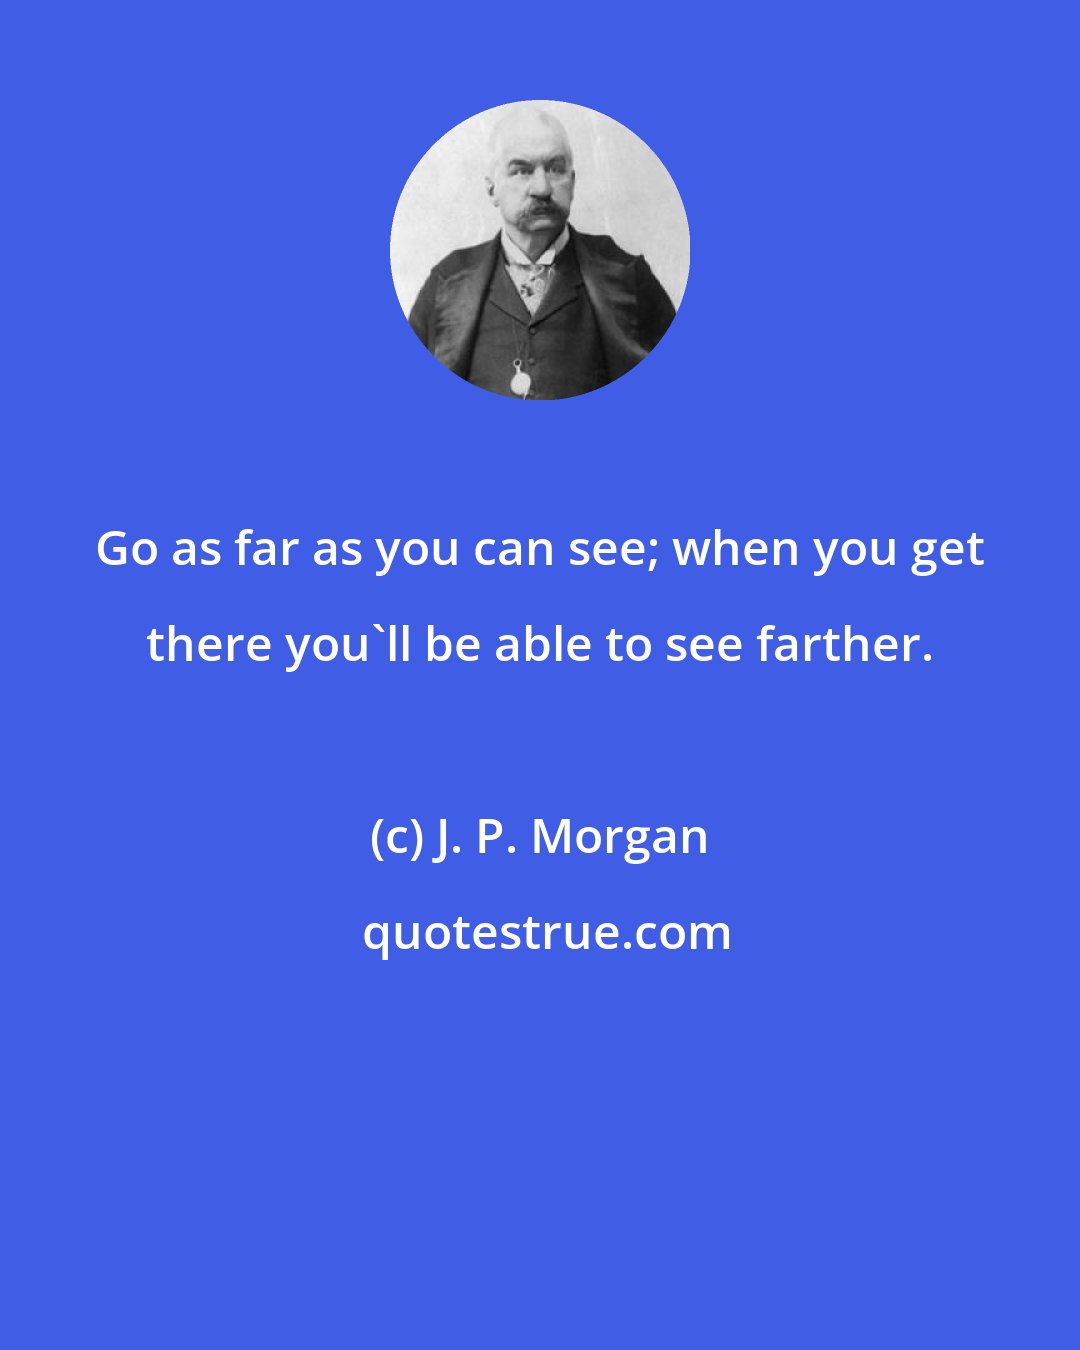 J. P. Morgan: Go as far as you can see; when you get there you'll be able to see farther.